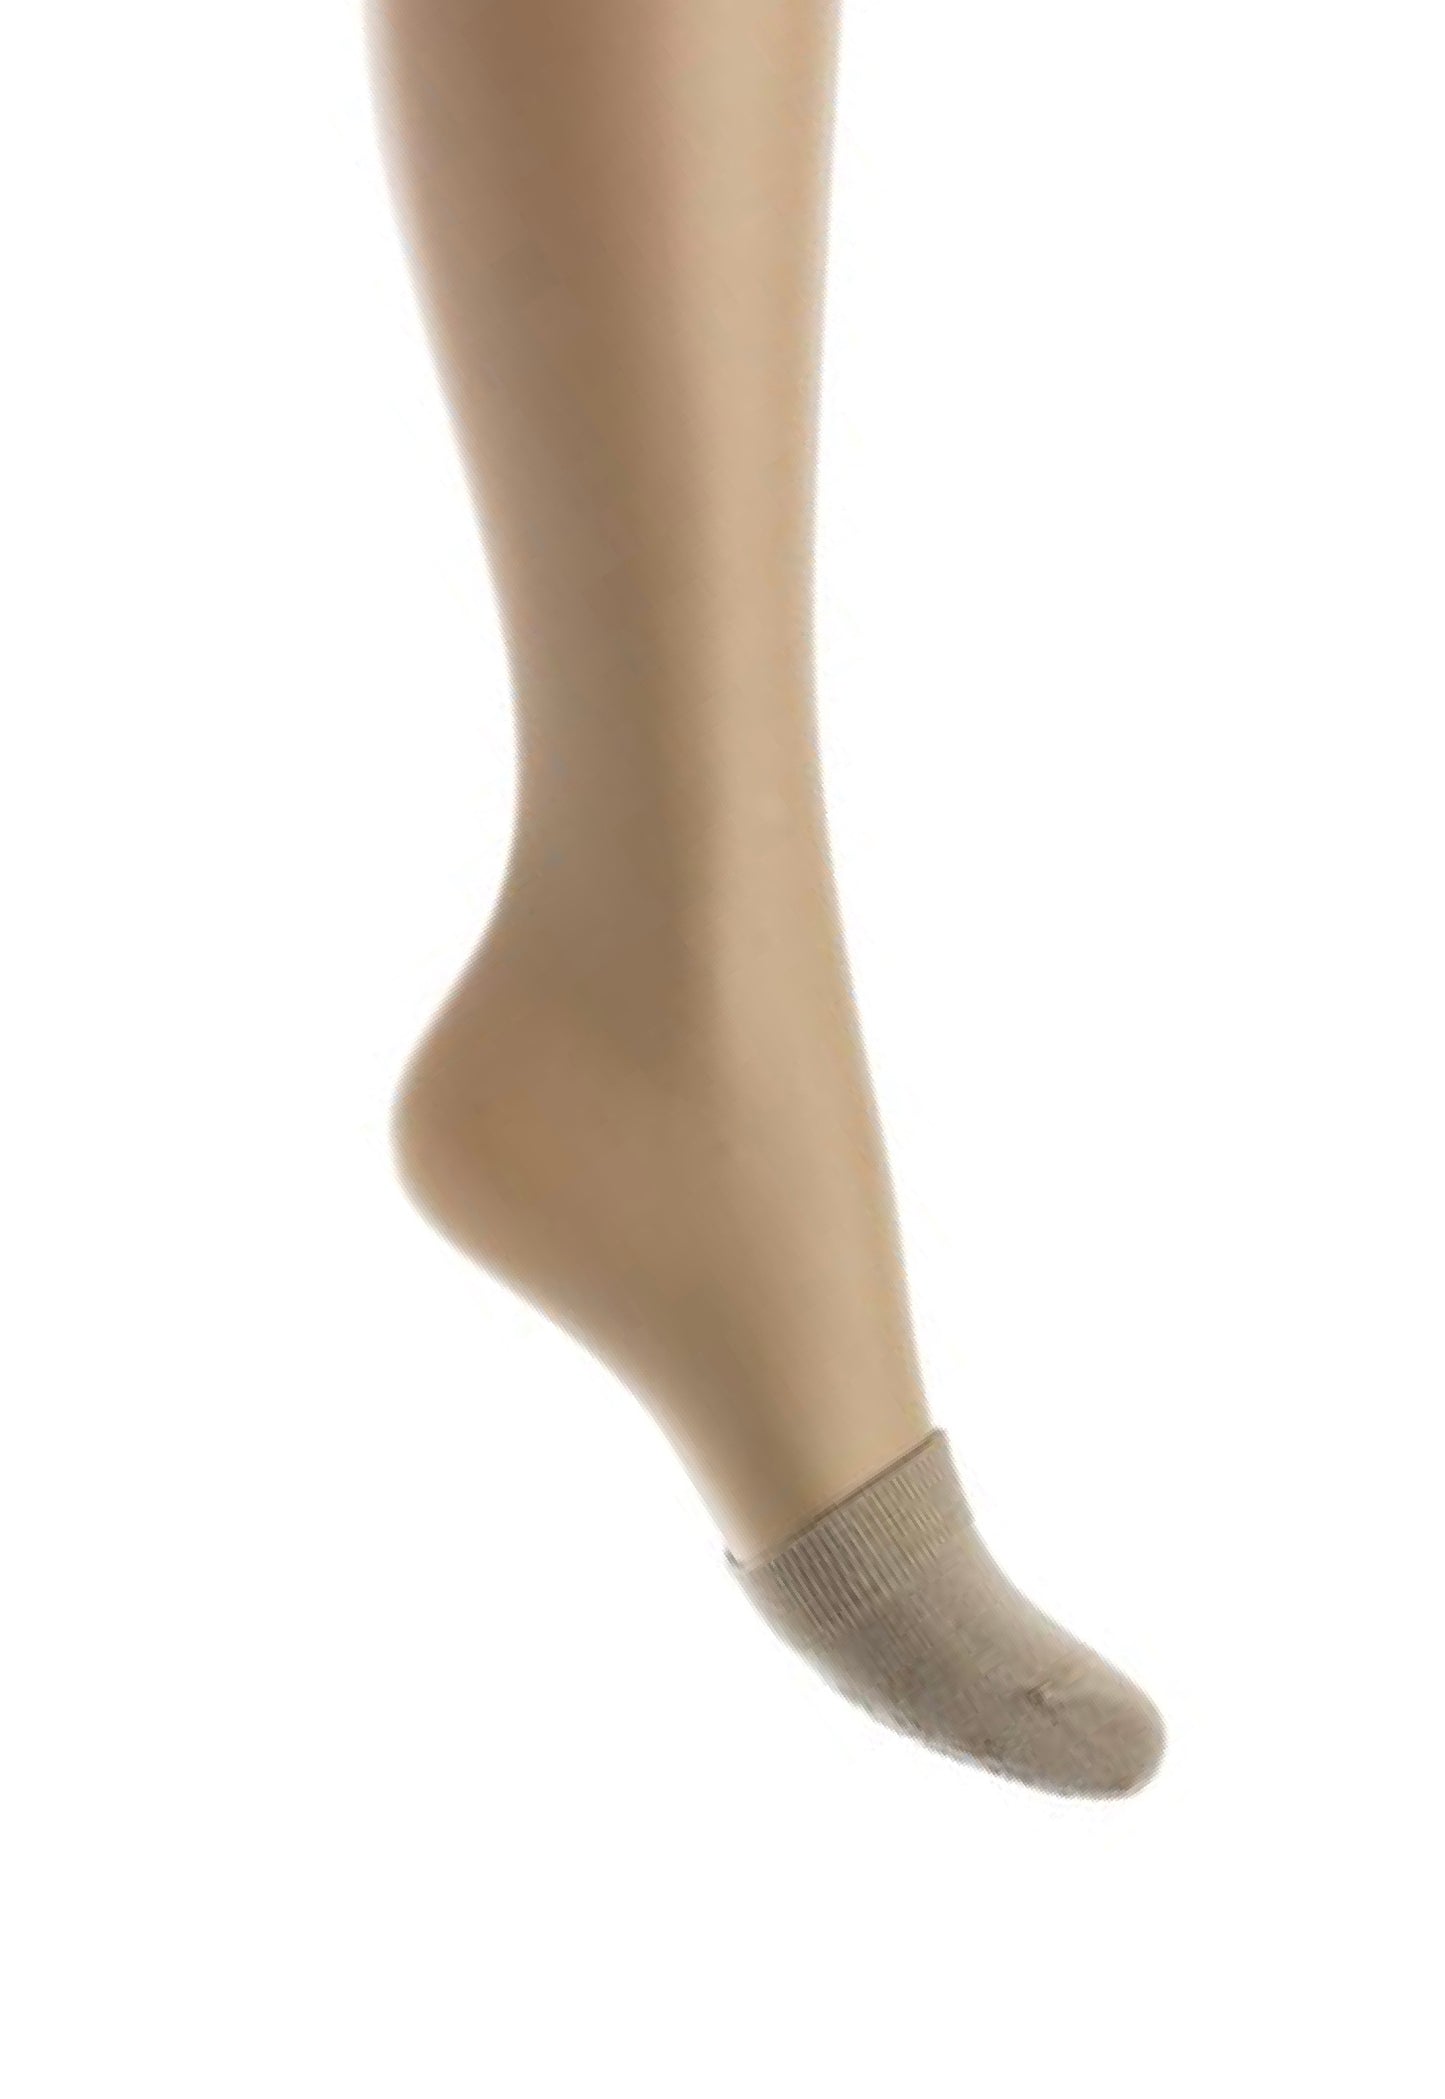 Bonnie Doon Toe Cover with Puff Print BE611000 - beige toe cover sock with grip print sole